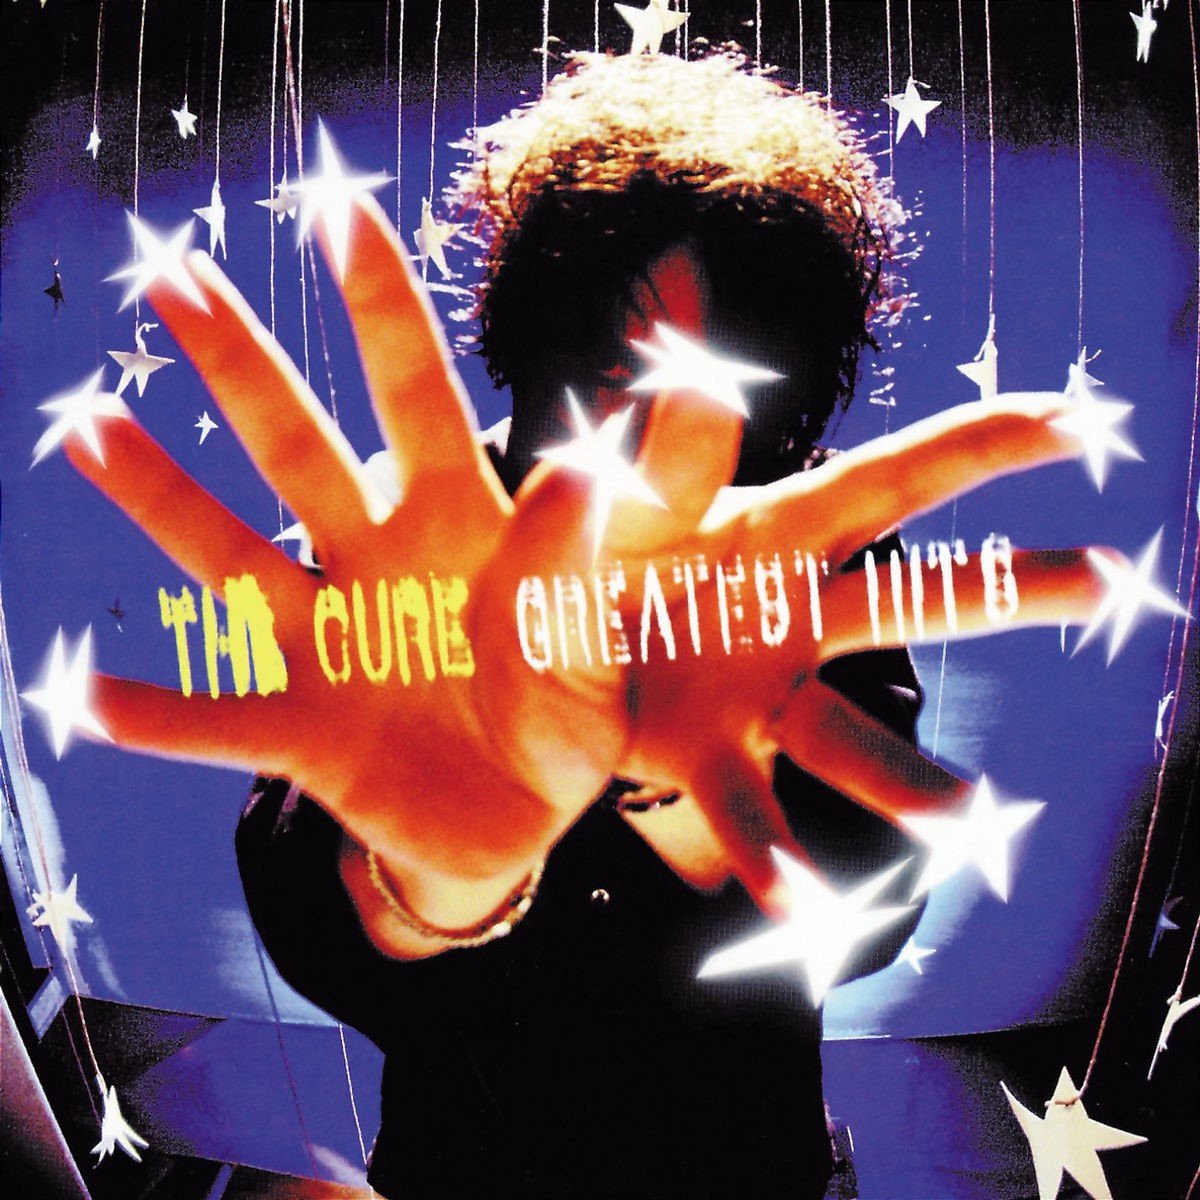 The Cure - Greatest Hits (CD) - The Cure